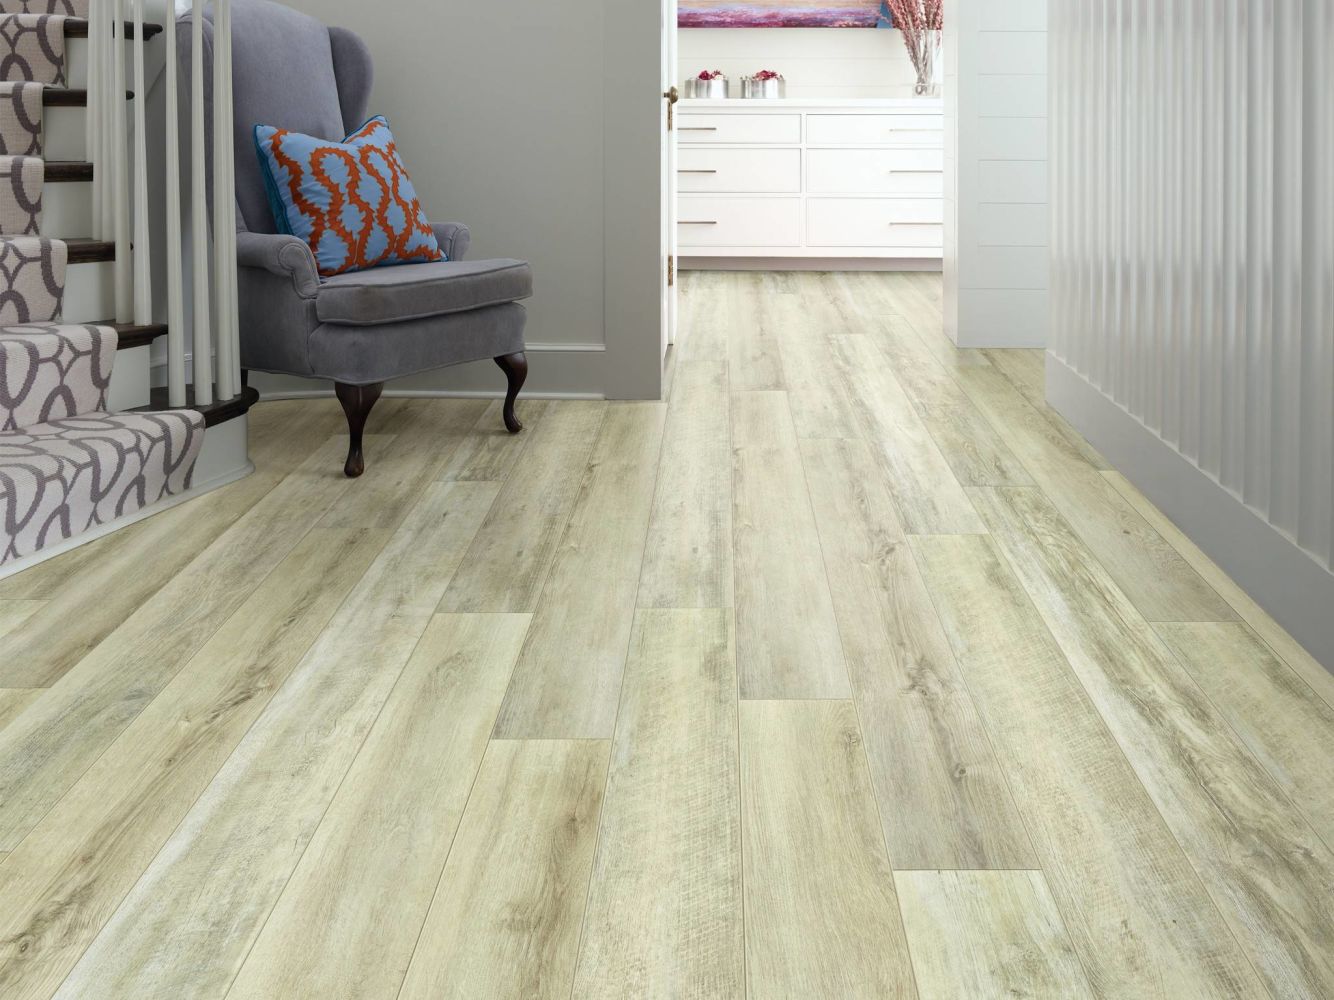 Shaw Floors Pulte Home Hard Surfaces Mission Plus XL HD Driftwood Oak 01029_PW779